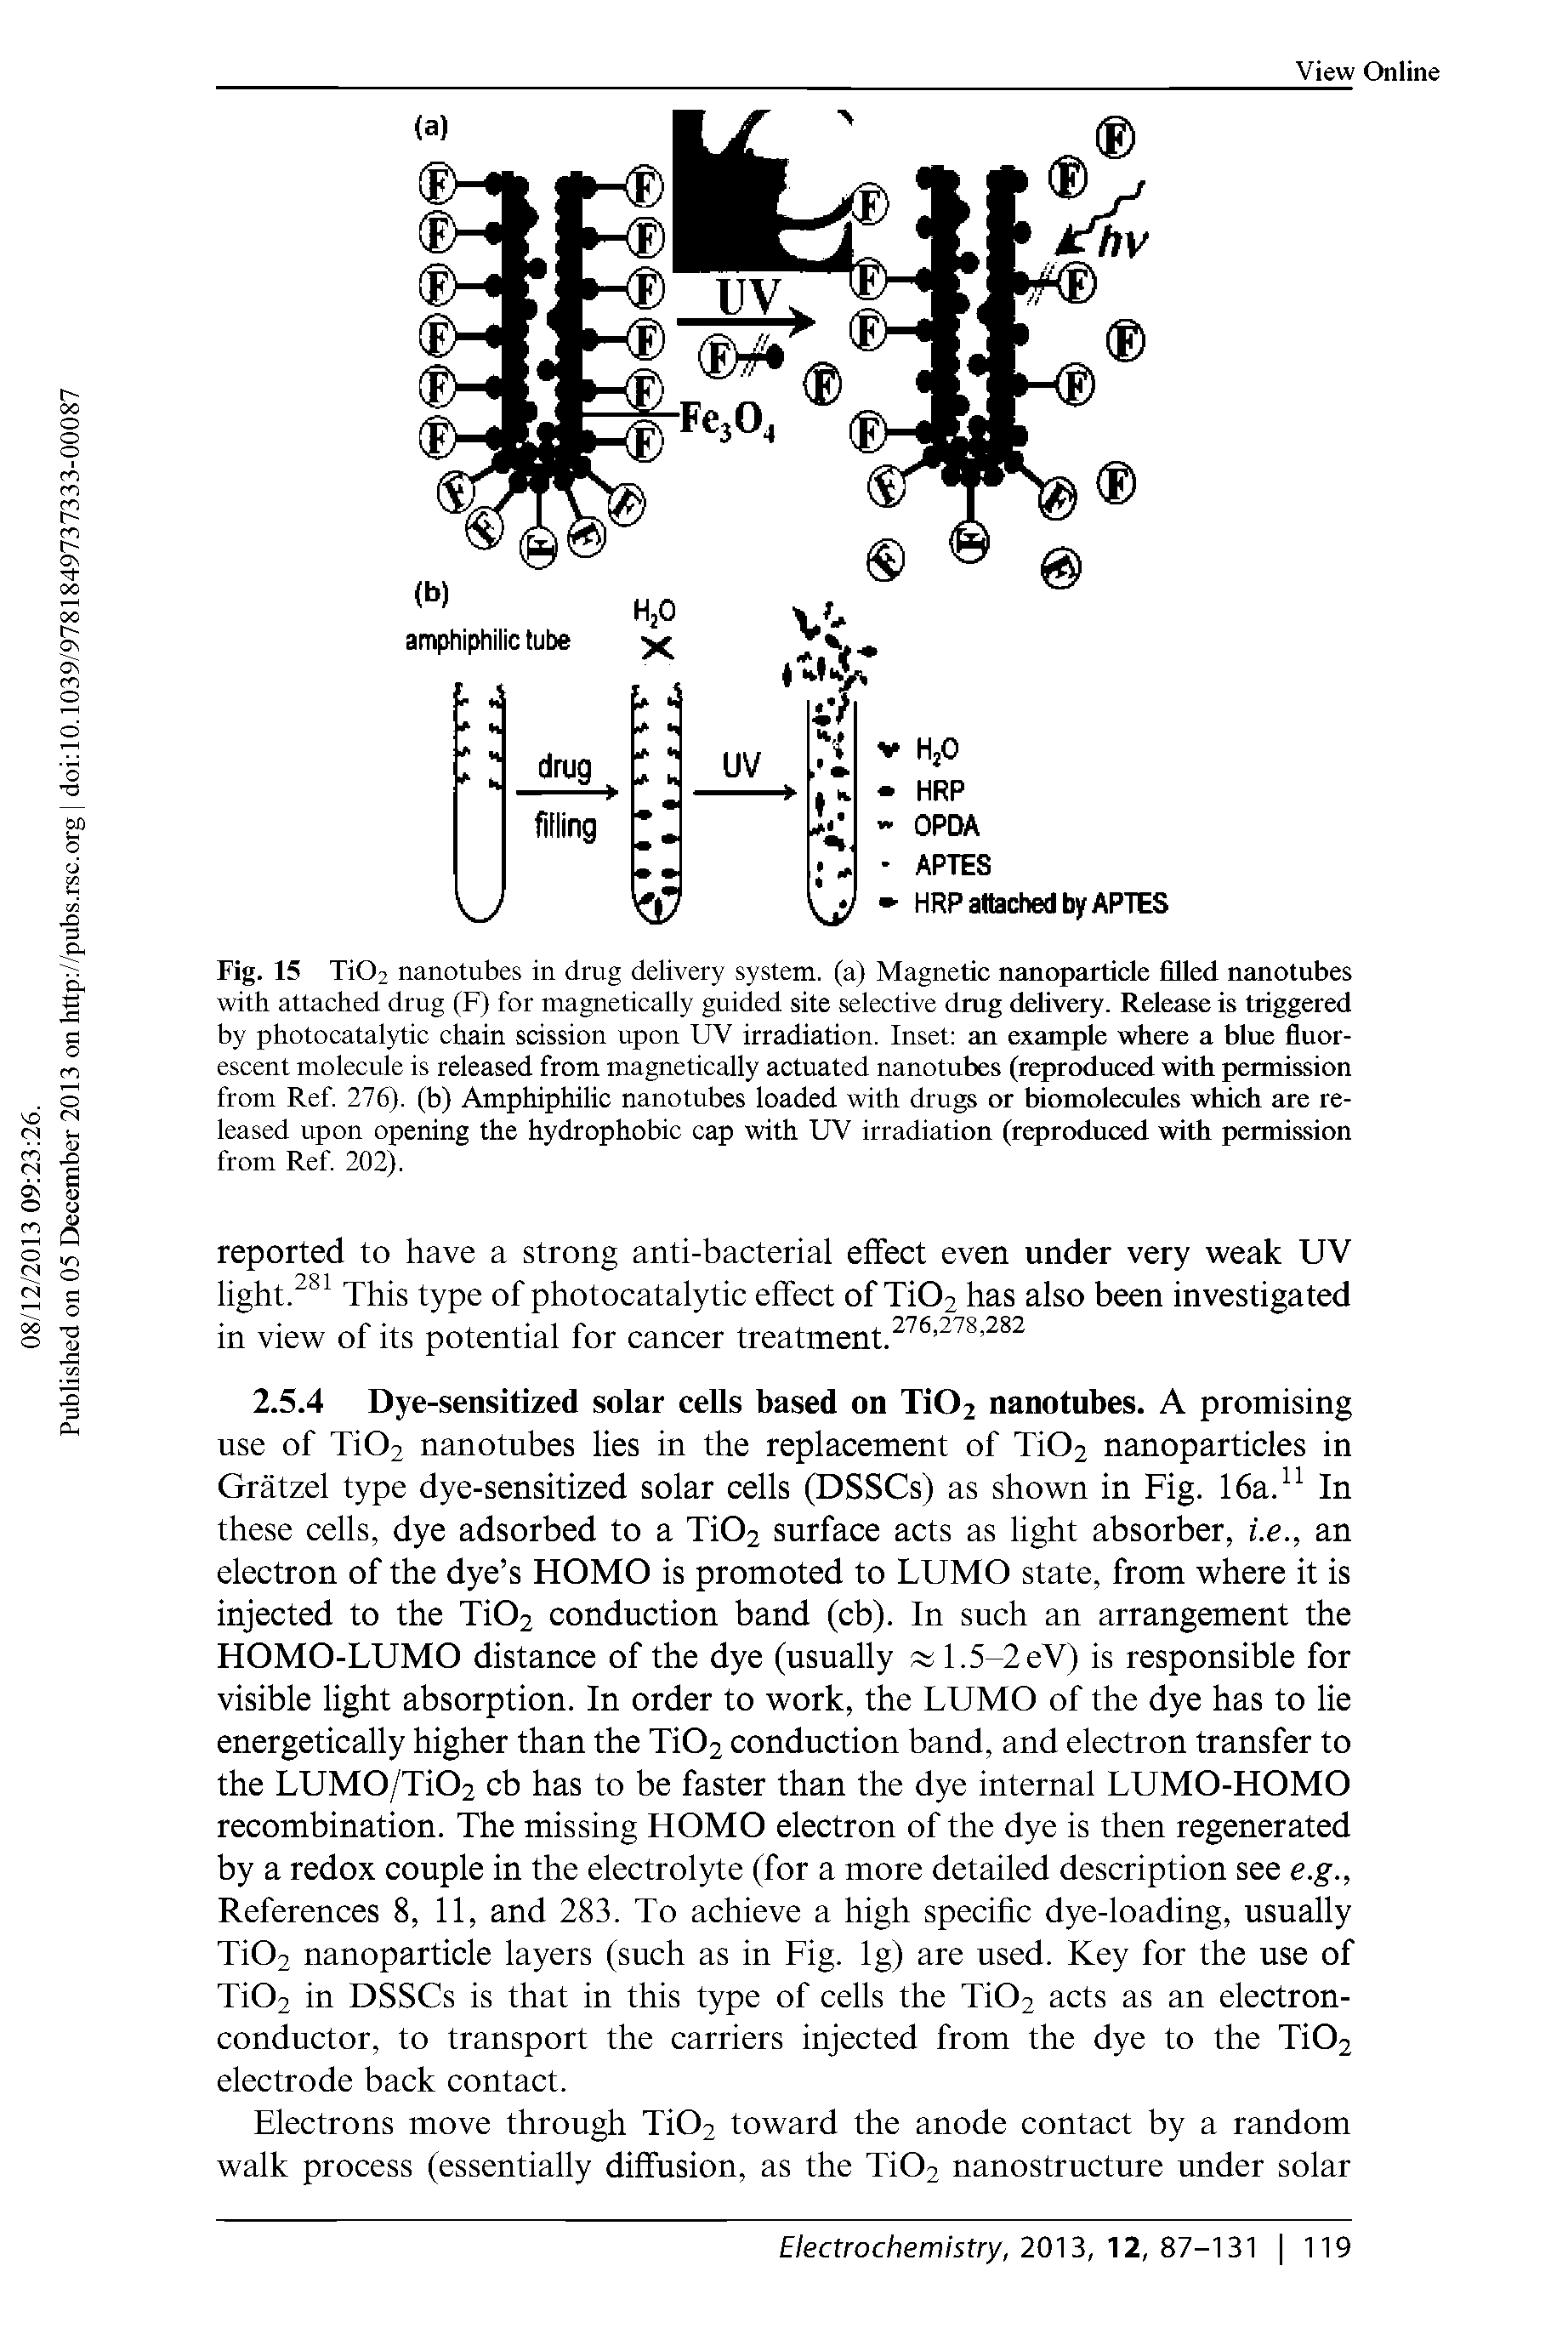 Fig. 15 T1O2 nanotubes in drug delivery system, (a) Magnetic nanoparticle filled nanotubes with attached drug (F) for magnetically guided site selective drug delivery. Release is triggered by photocatalytic chain scission upon UV irradiation. Inset an example where a blue fluorescent molecule is released from magnetically actuated nanotubes (reproduced with permission from Ref 276). (b) Amphiphilic nanotubes loaded with drugs or biomolecules which are released upon opening the hydrophobic cap with UV irradiation (reproduced with permission from Ref 202).